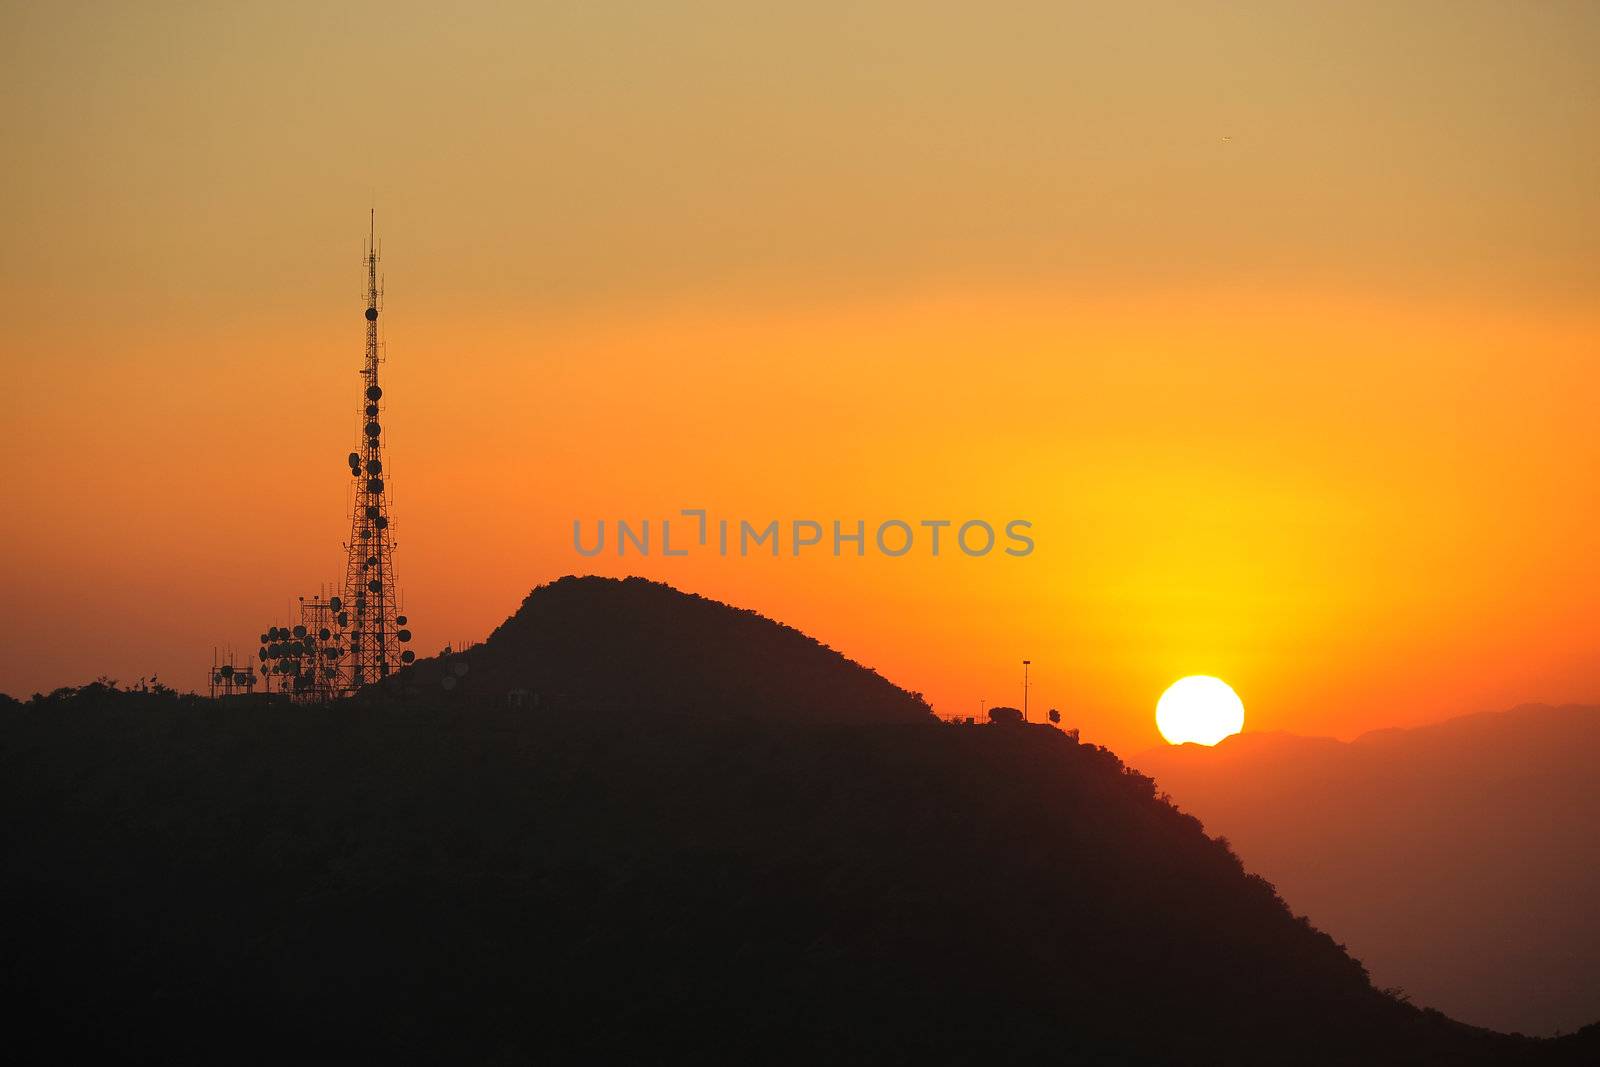 sunset over mountains with radio station